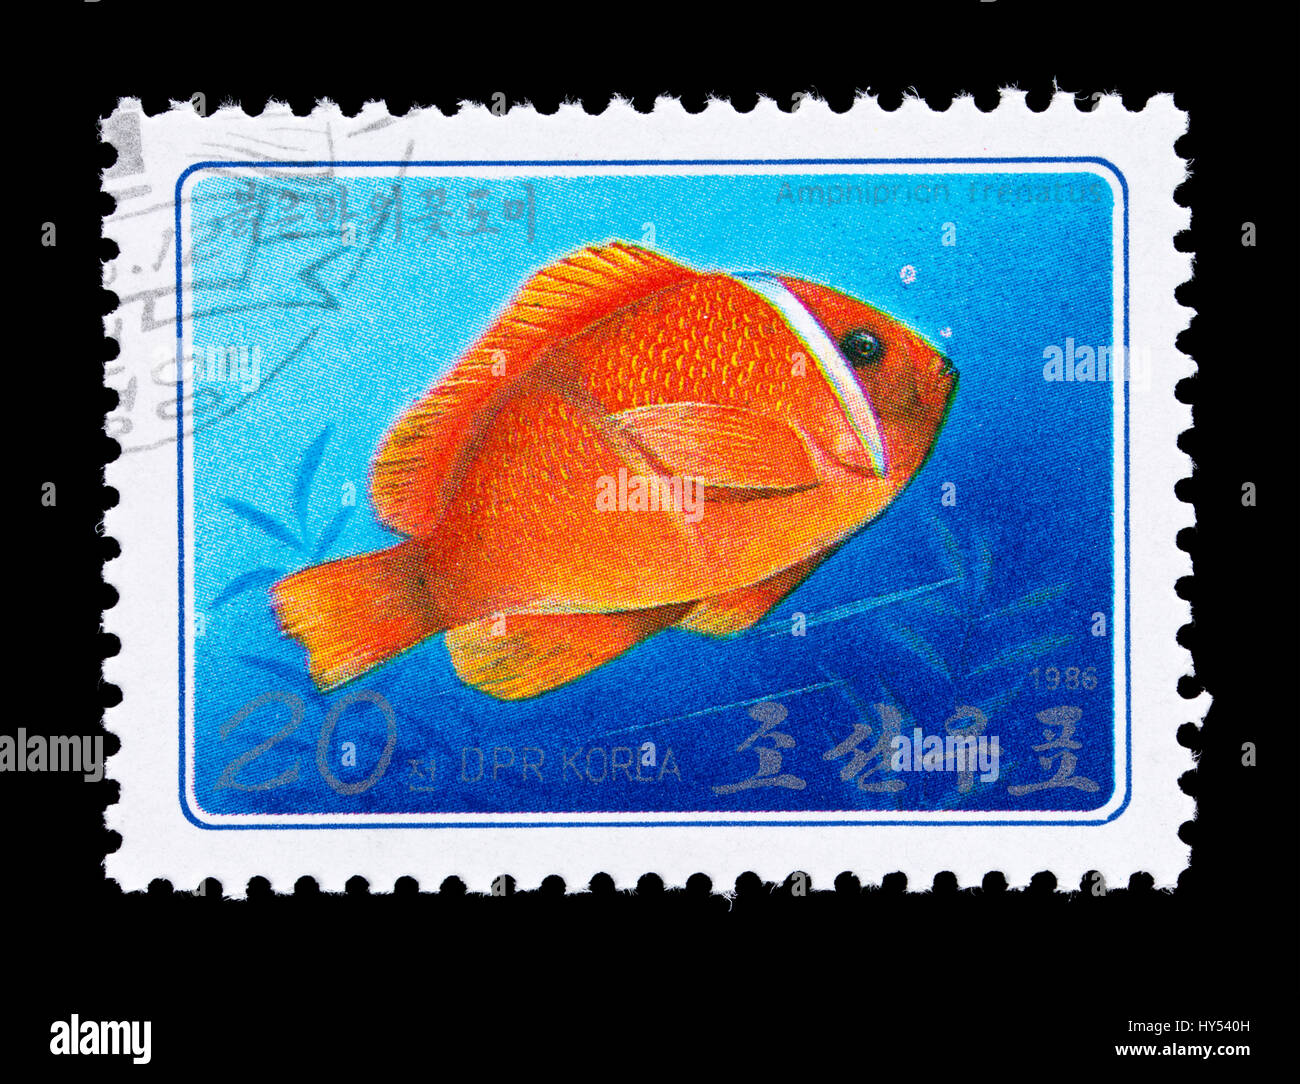 Postage stamp from North Korea depicting a tomato clownfish (Amphiprion frenatus) Stock Photo